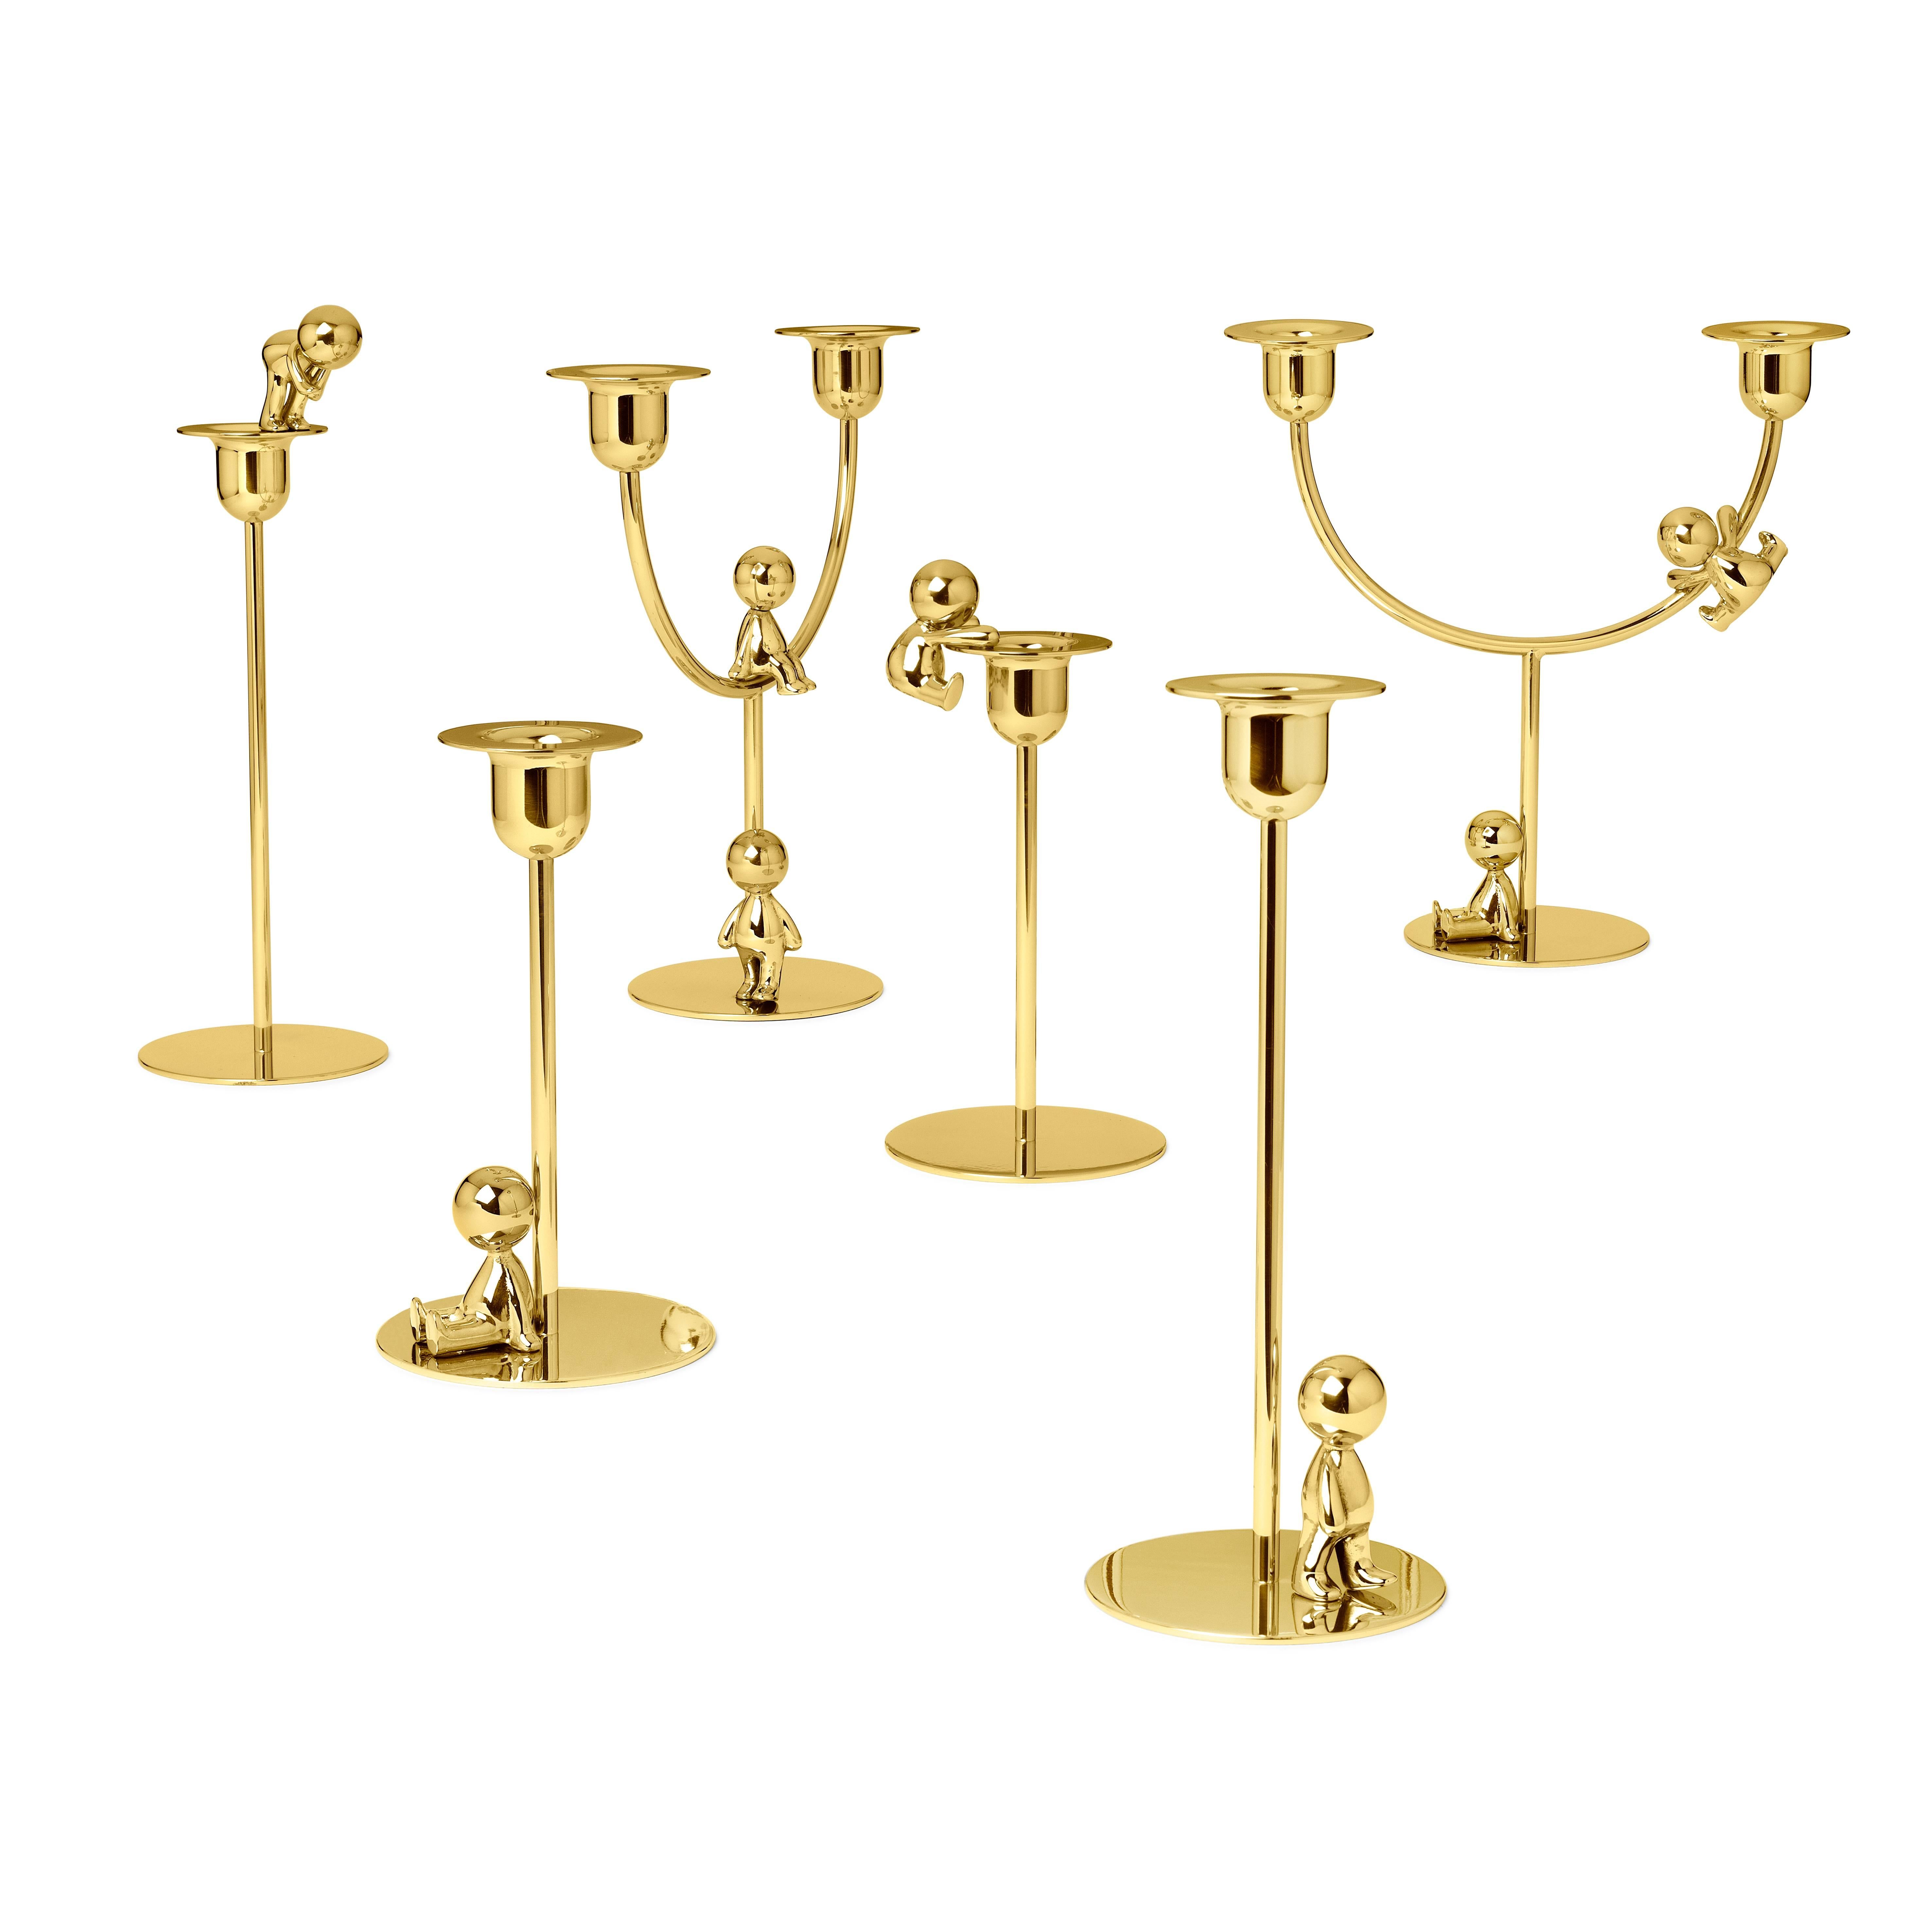 This delightful polished brass short candlestick is a creative accent for any modern interior. Designed for taper candles, the streamlined design boasts a rounded bobeche with a wide rim supported by a short column and a flat base. A small figurine